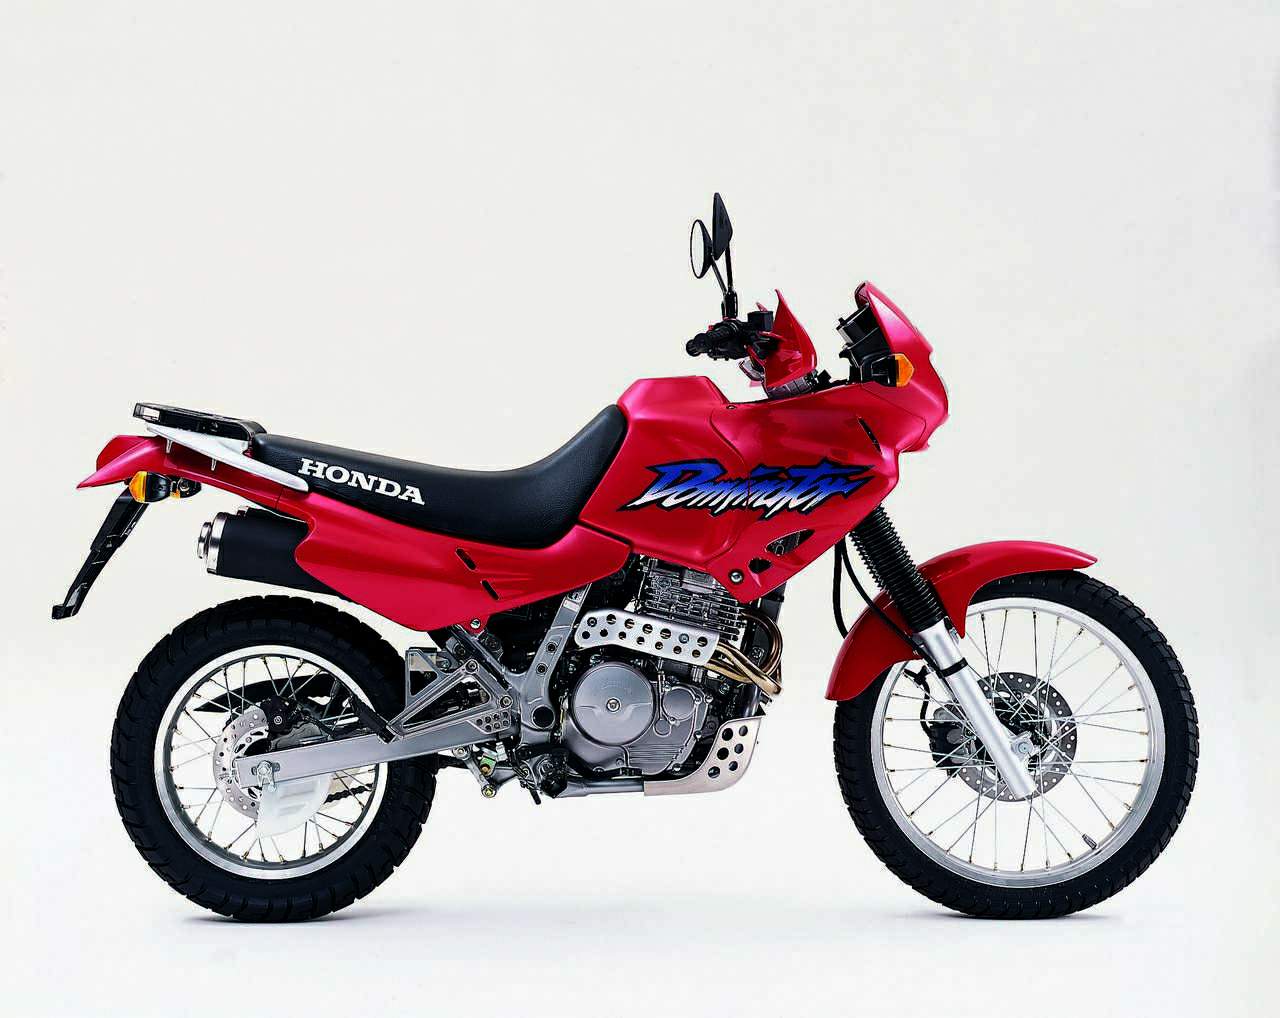 Review of Honda NX 650 Dominator 1998: pictures, live 